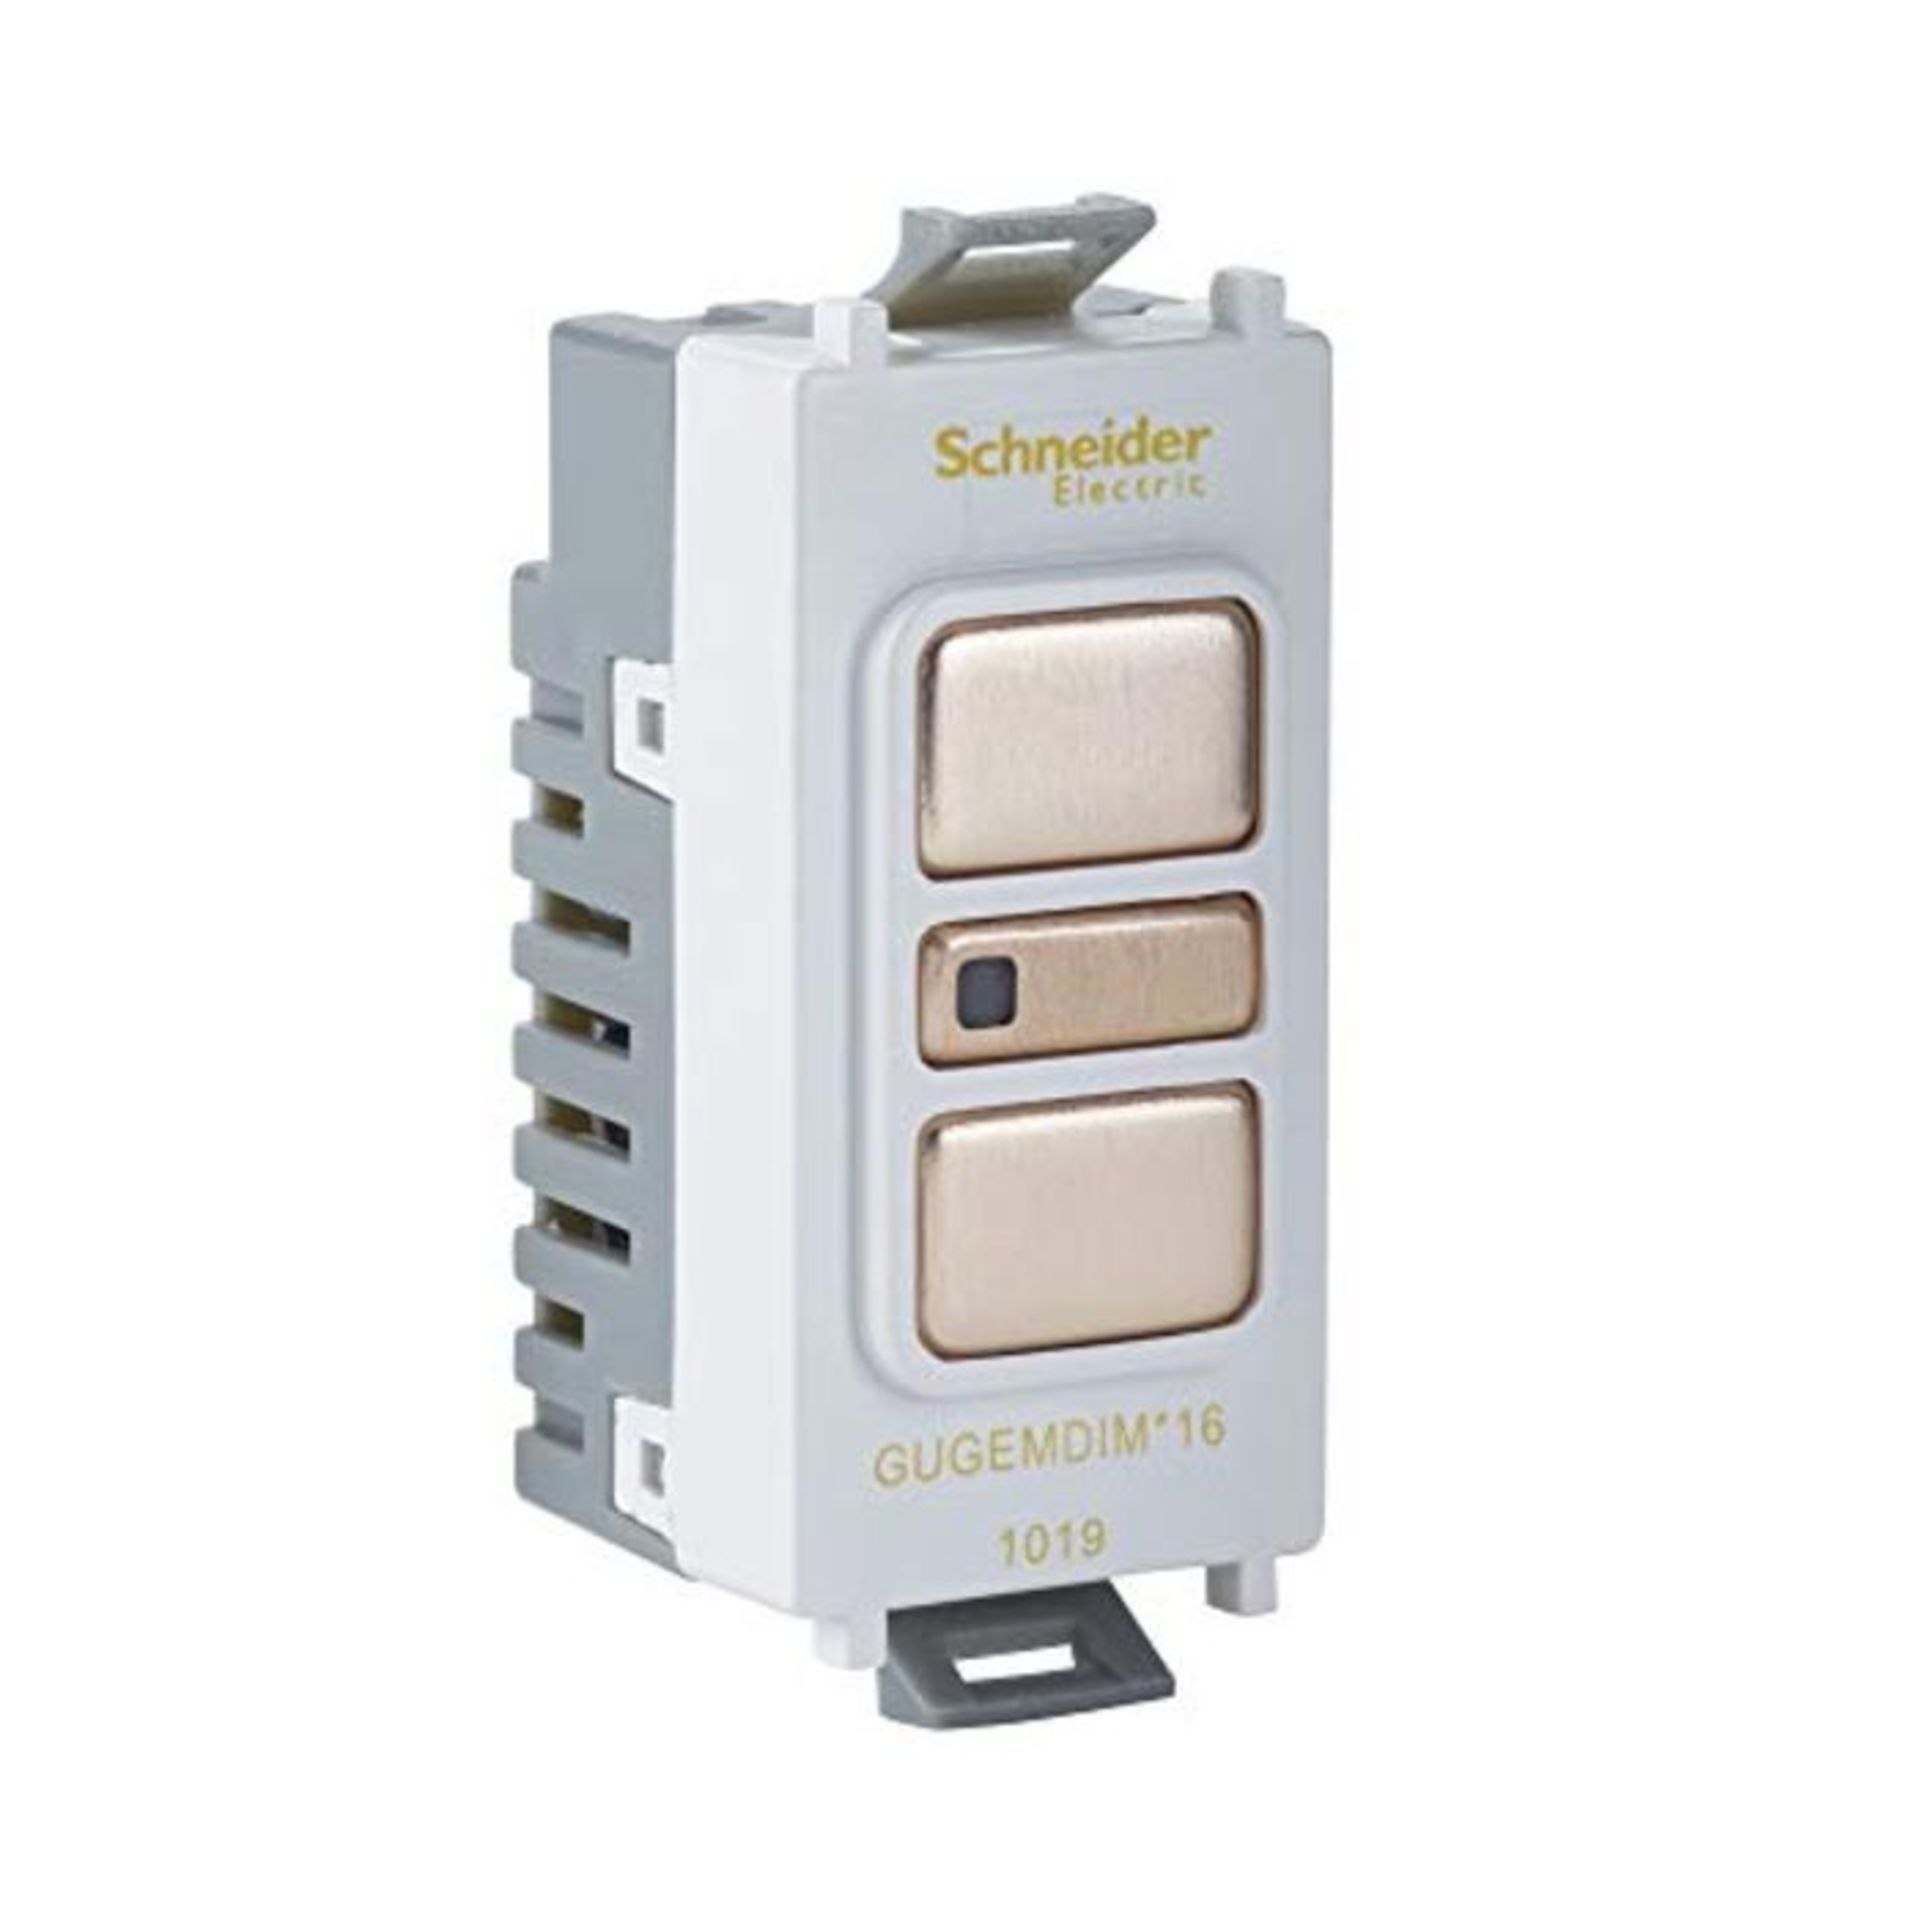 Schneider Electric Ultimate Grid - Retractive 2 Way Touch Dimmer Light Switch, 300VA, - Image 3 of 4